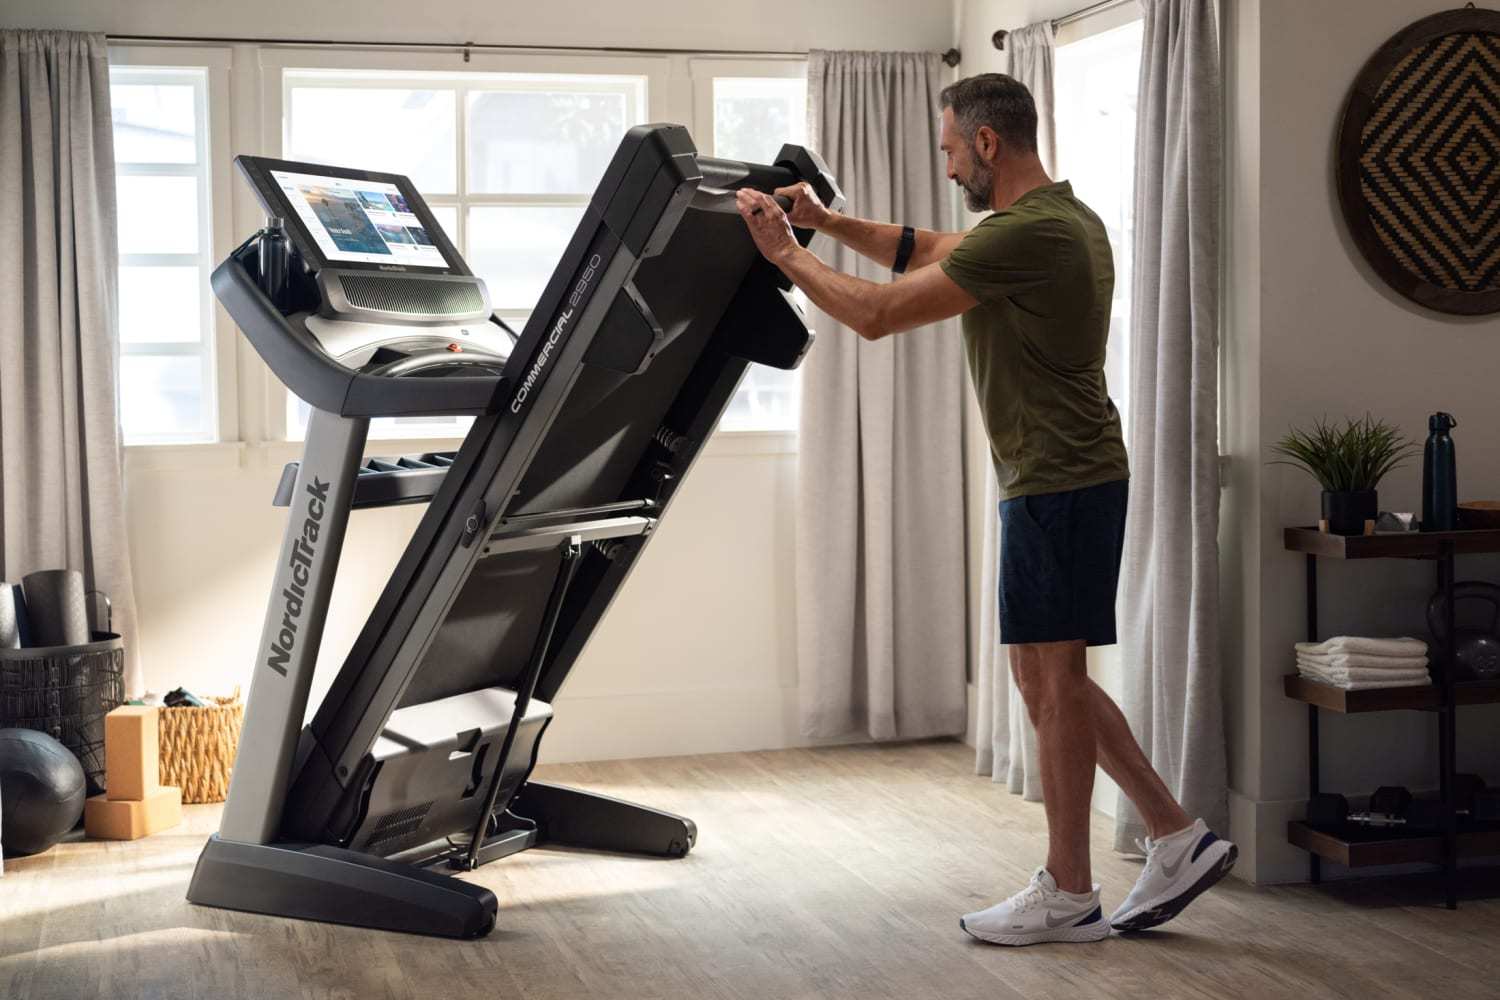 How To Disassemble A Treadmill
